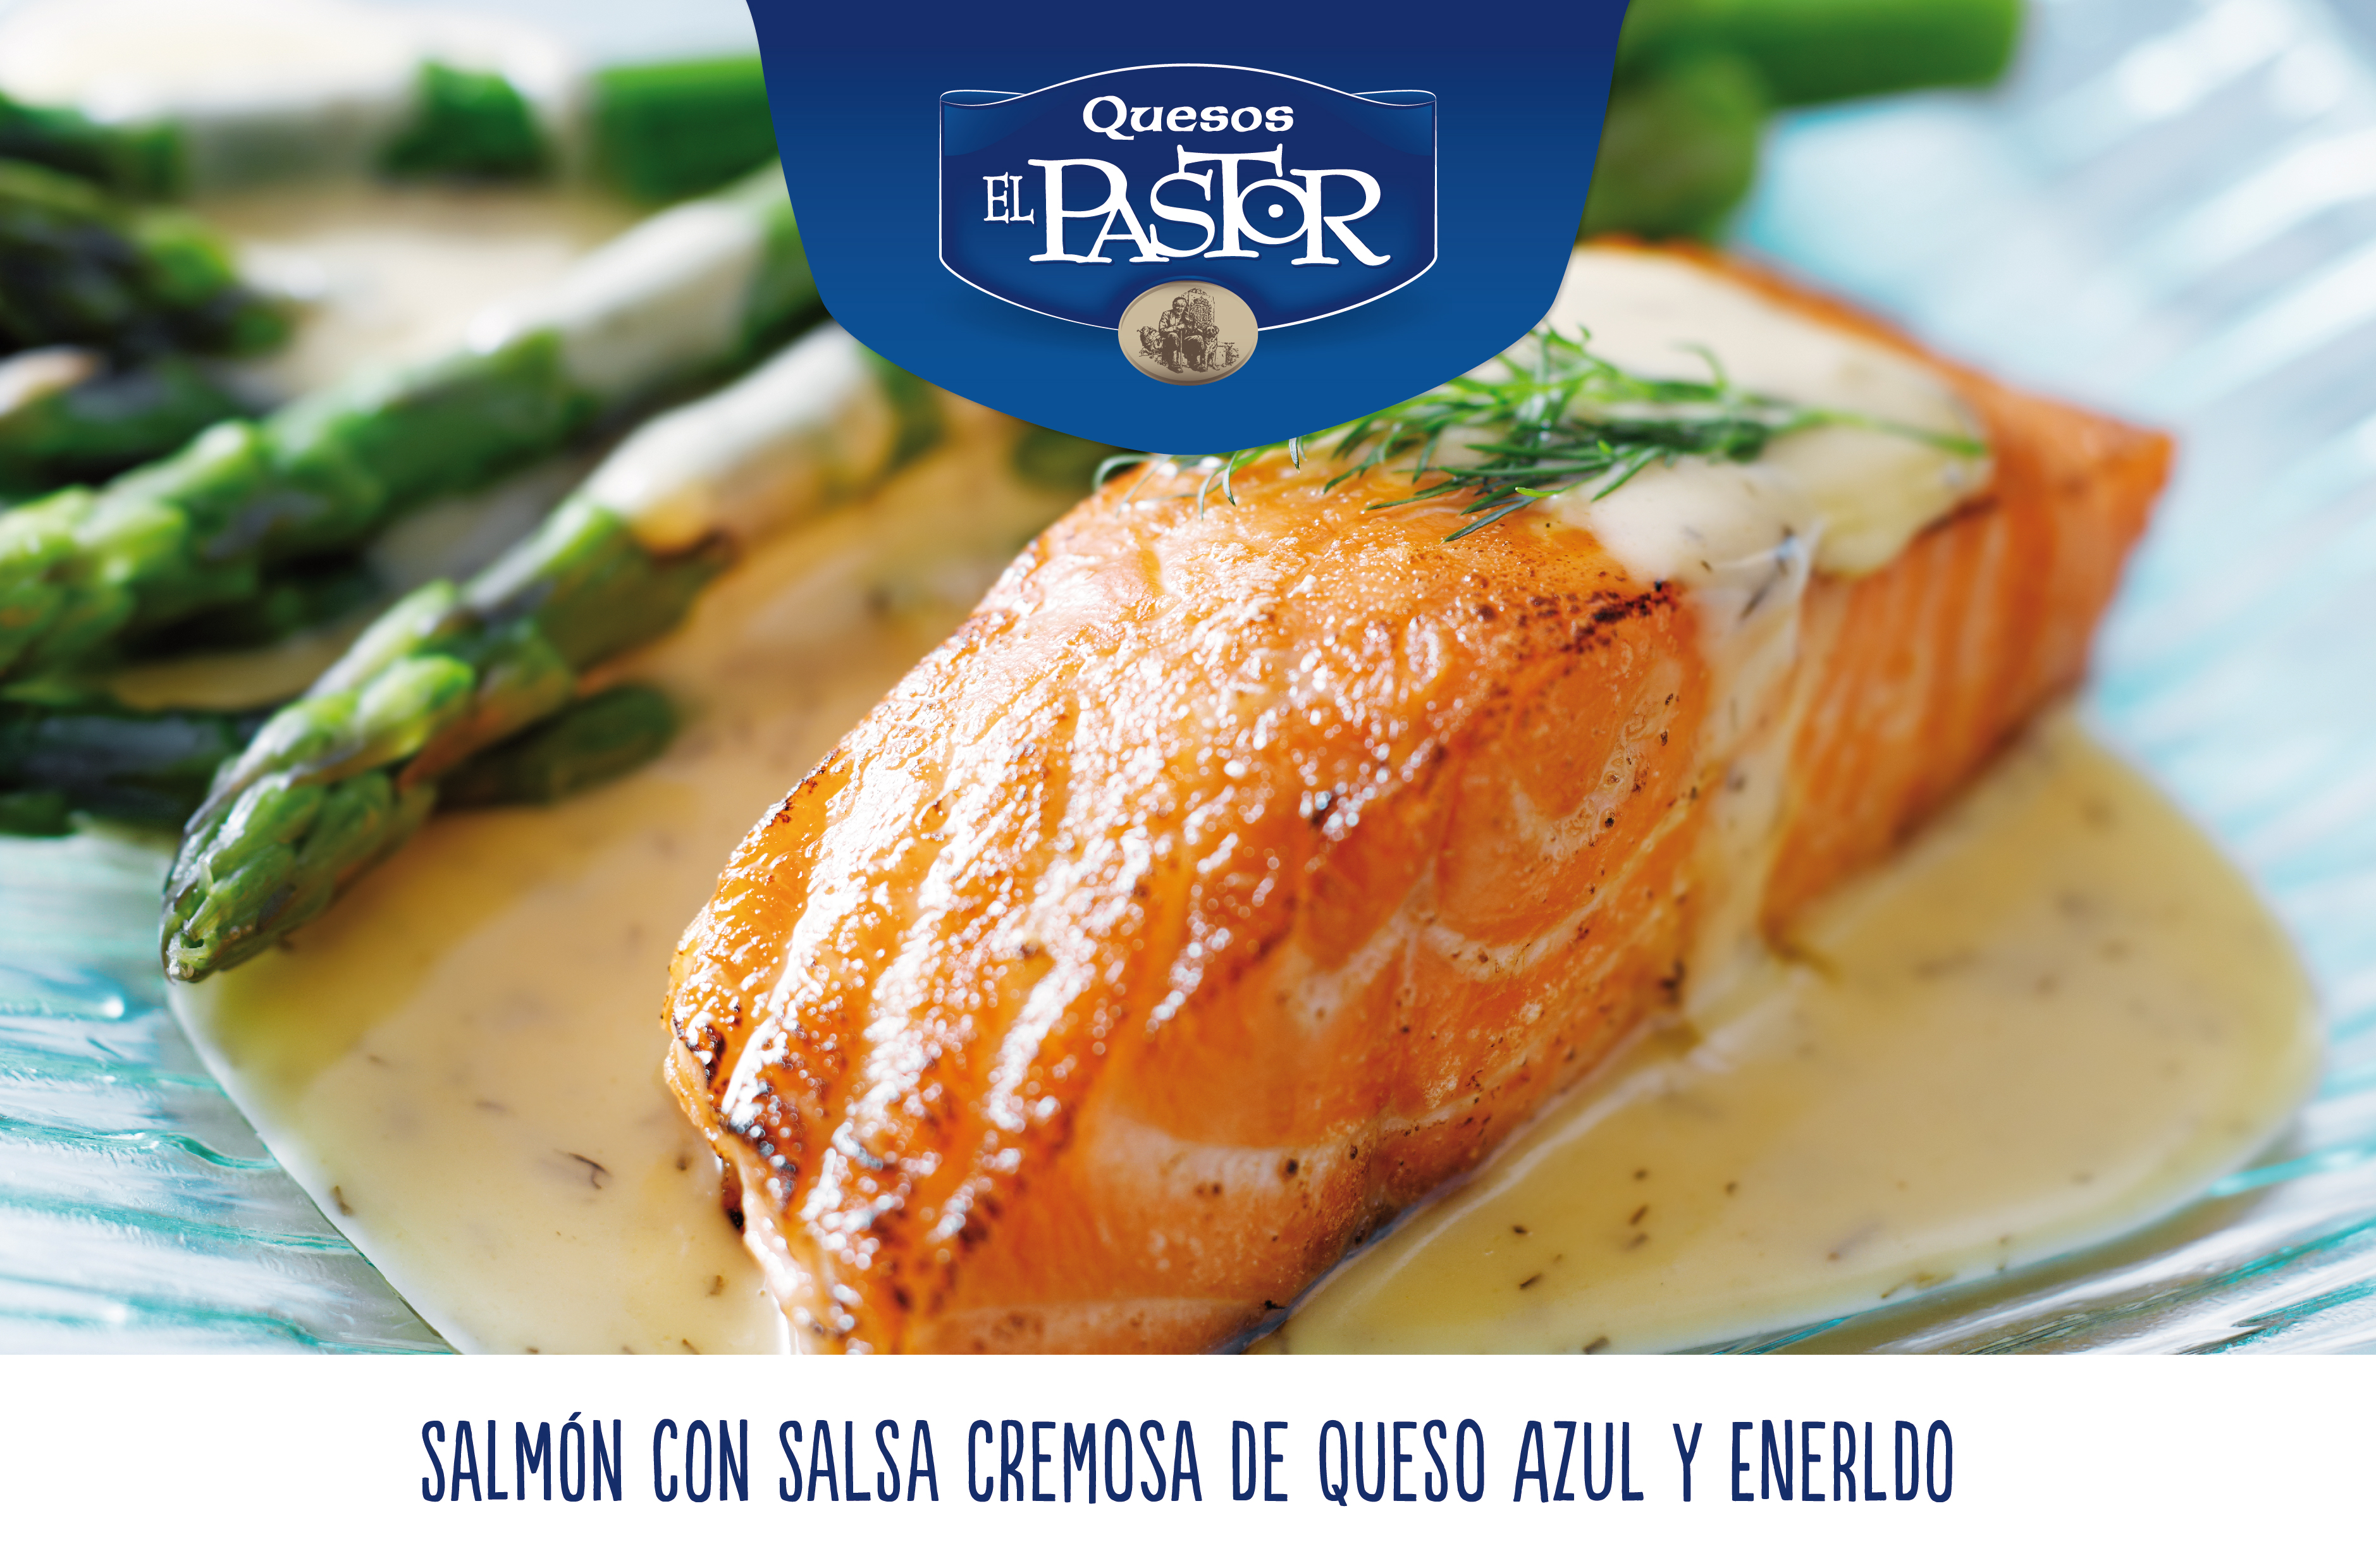 KITCHEN WITH EL PASTOR - Salmon with creamy blue cheese and dill sauce -  Quesos El Pastor